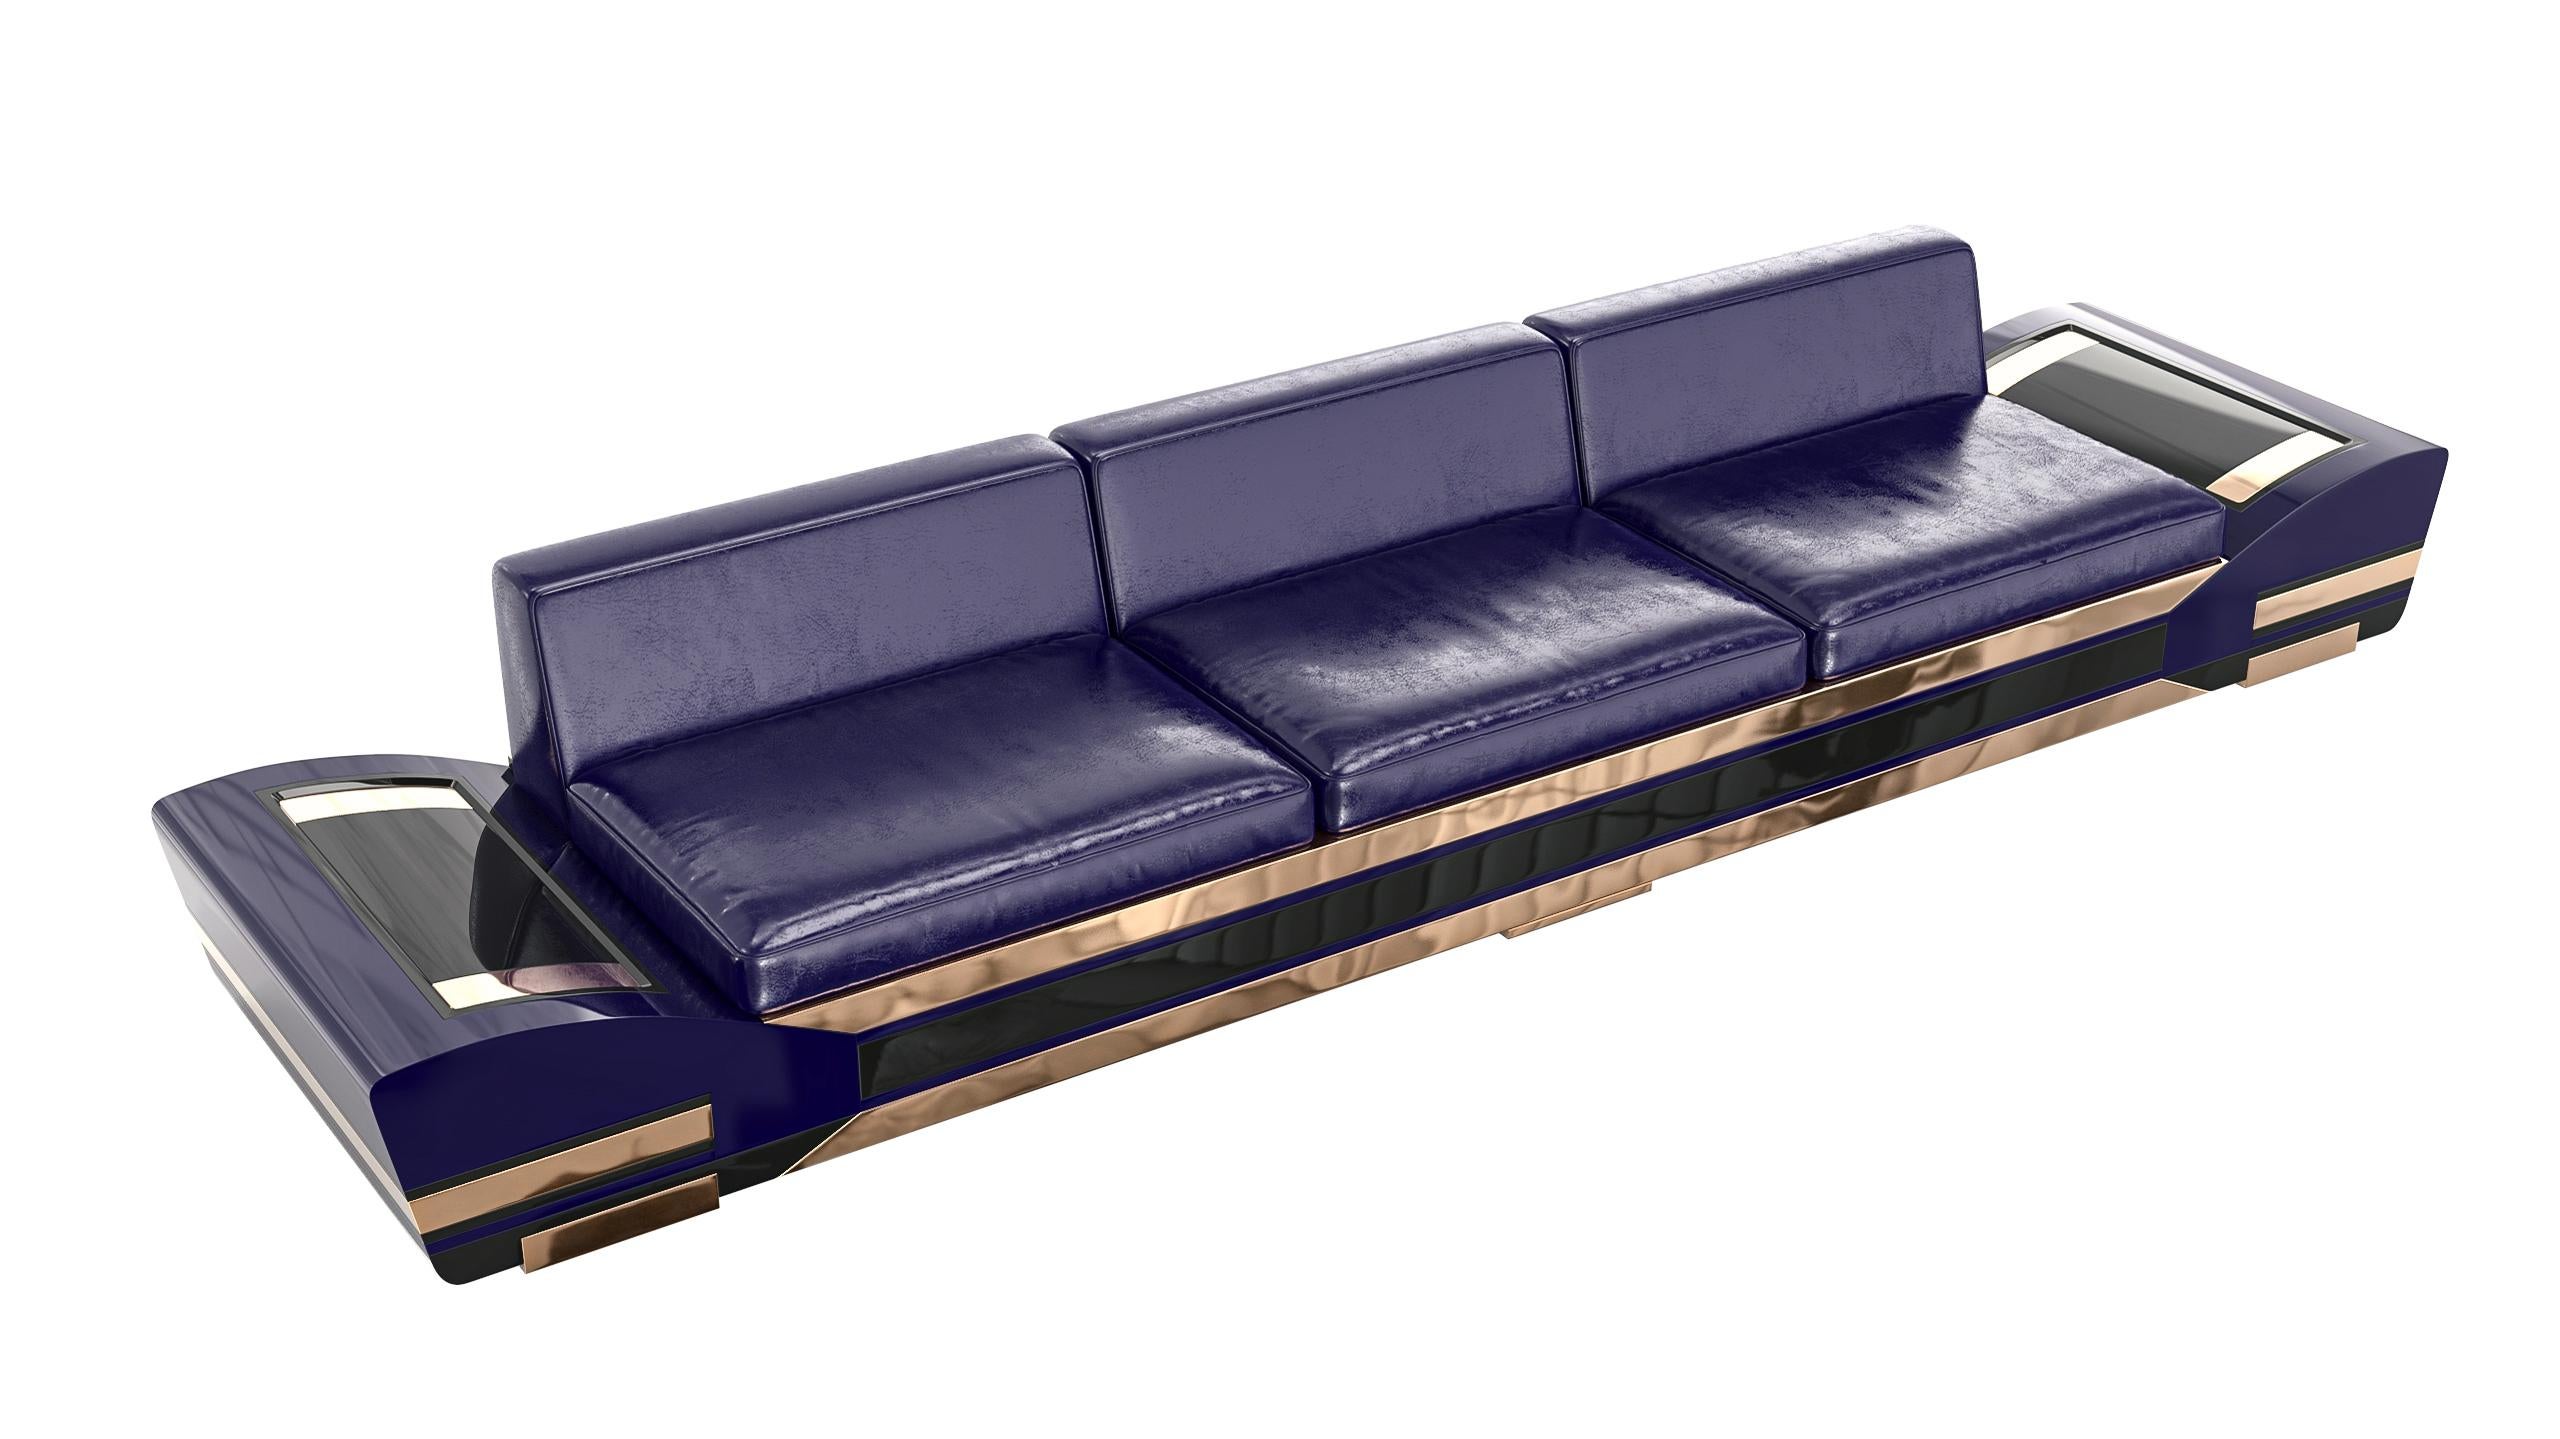 "il Gabbiano" Sofa with Stainless Steel and Bronze Details, Istanbul